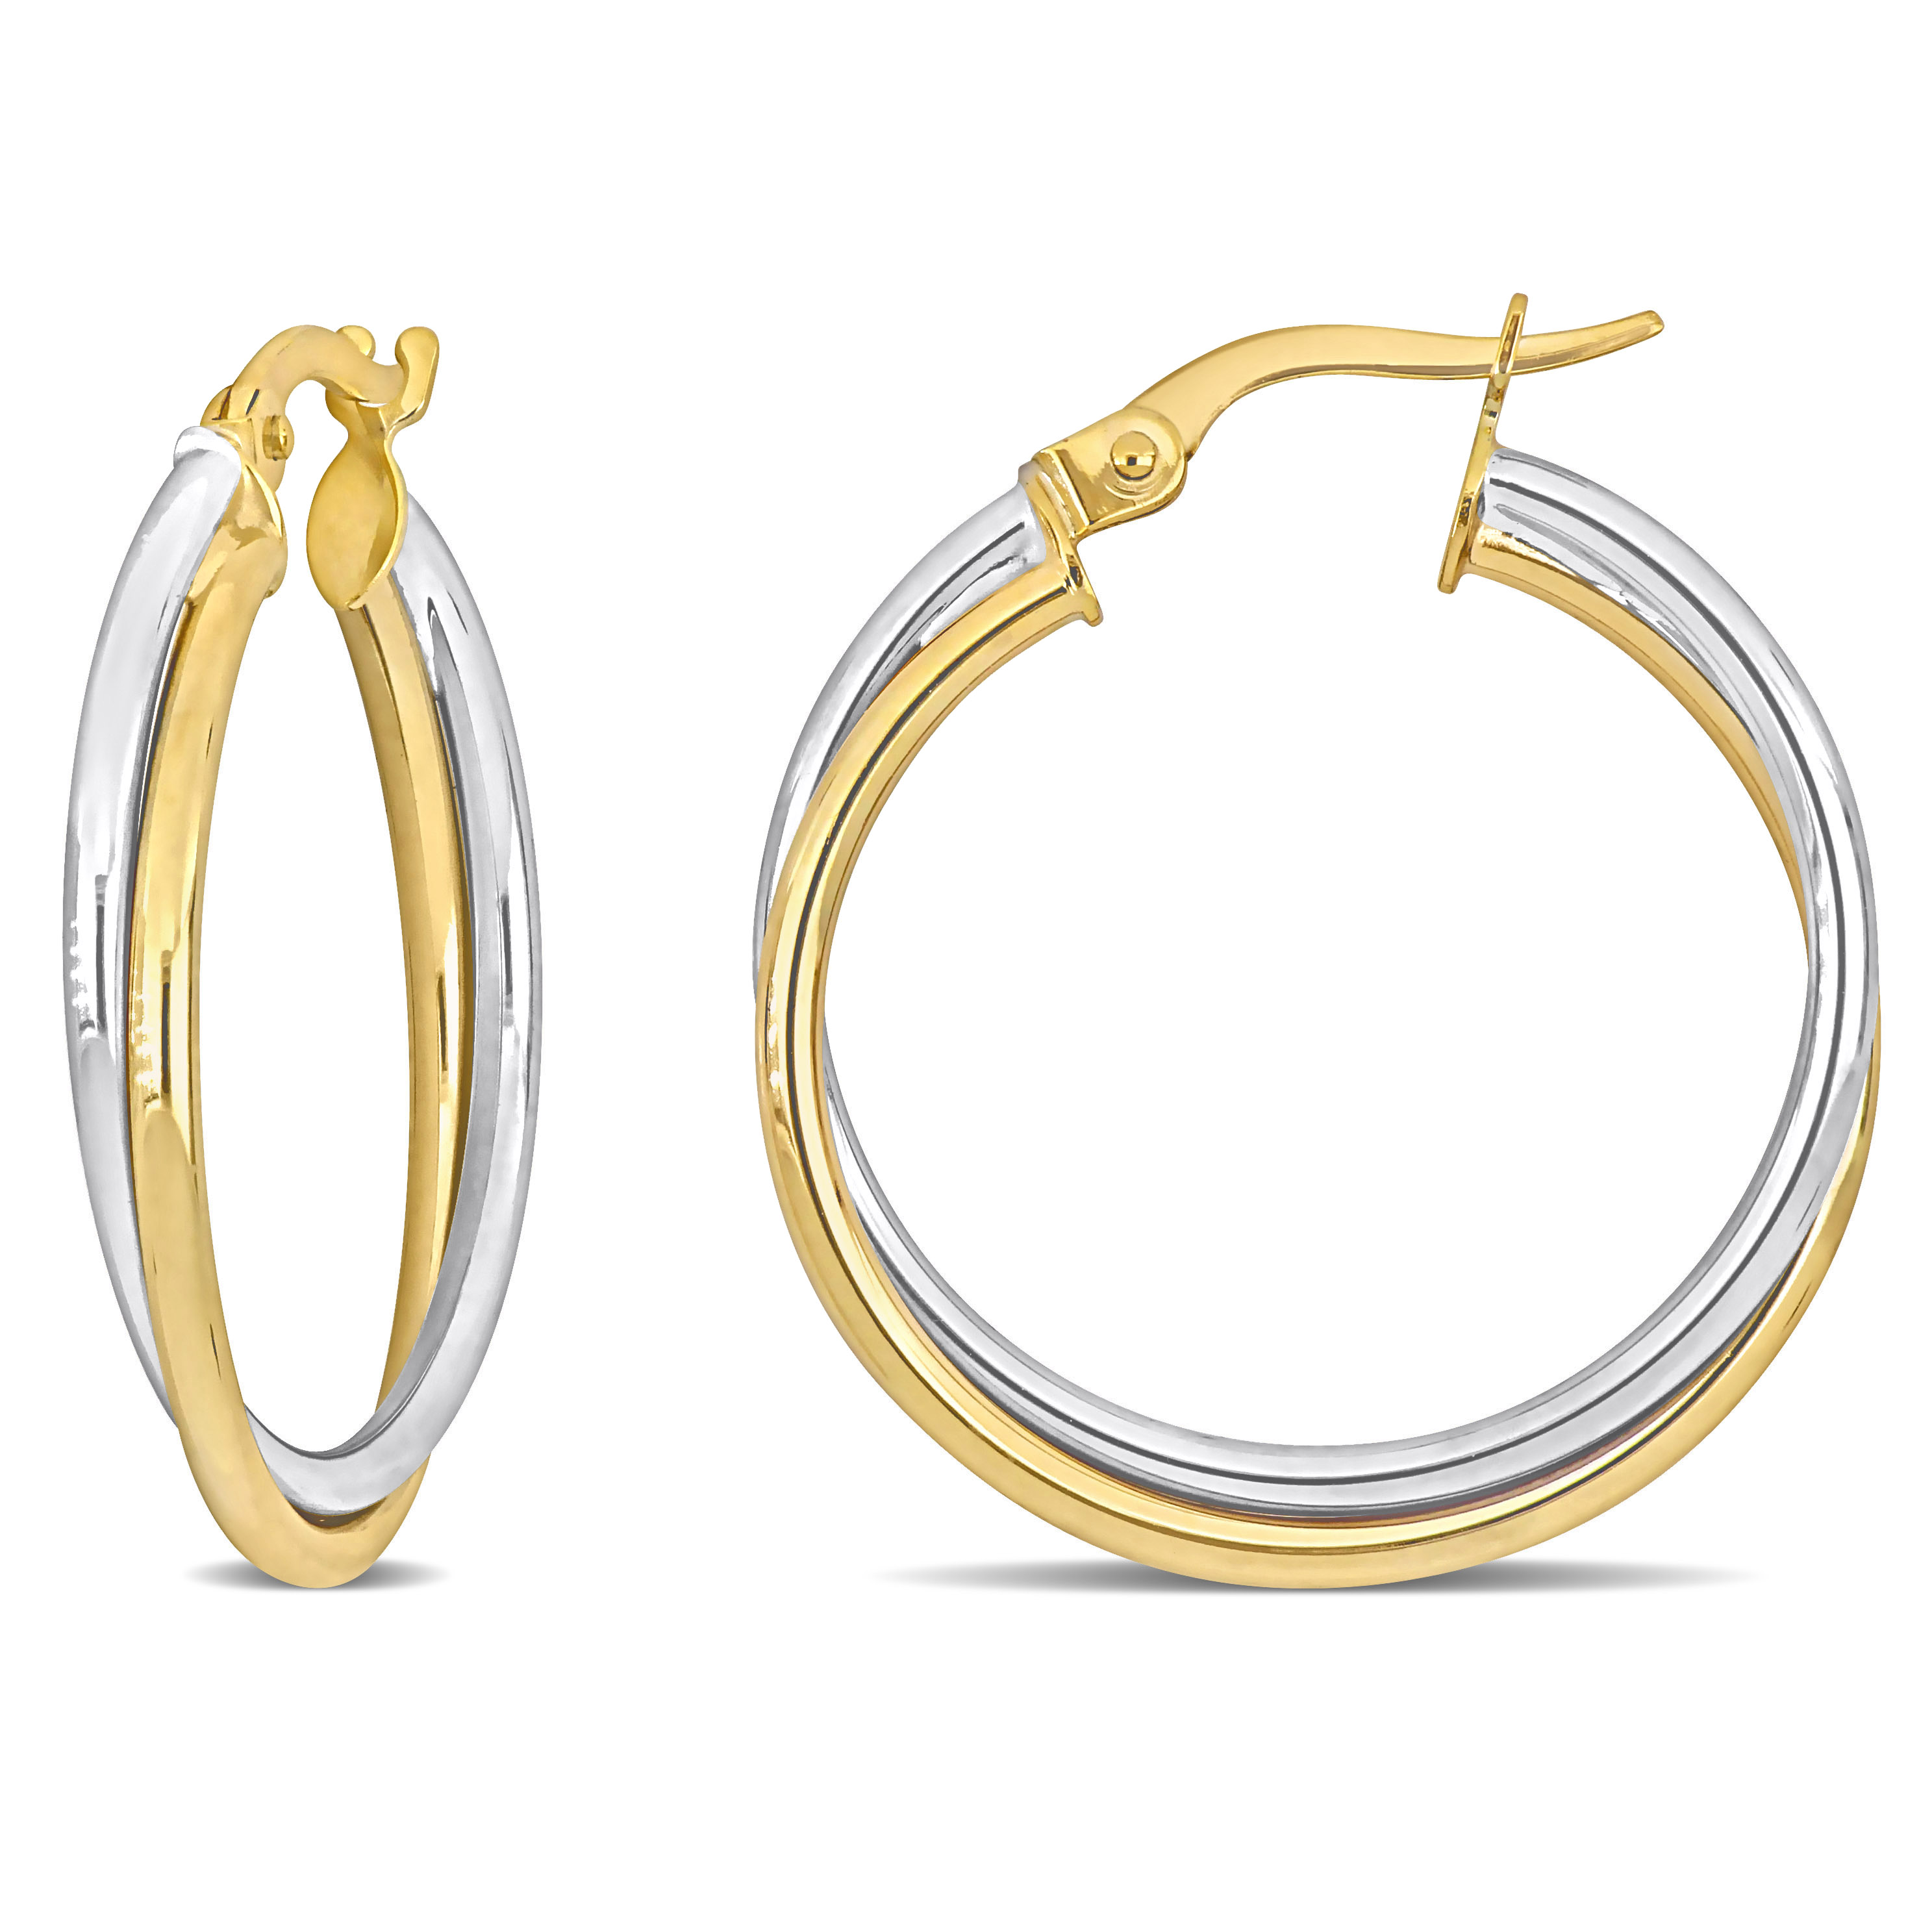 26 MM Crossover Hoop Earrings in 2-Tone 10k Yellow and White Gold